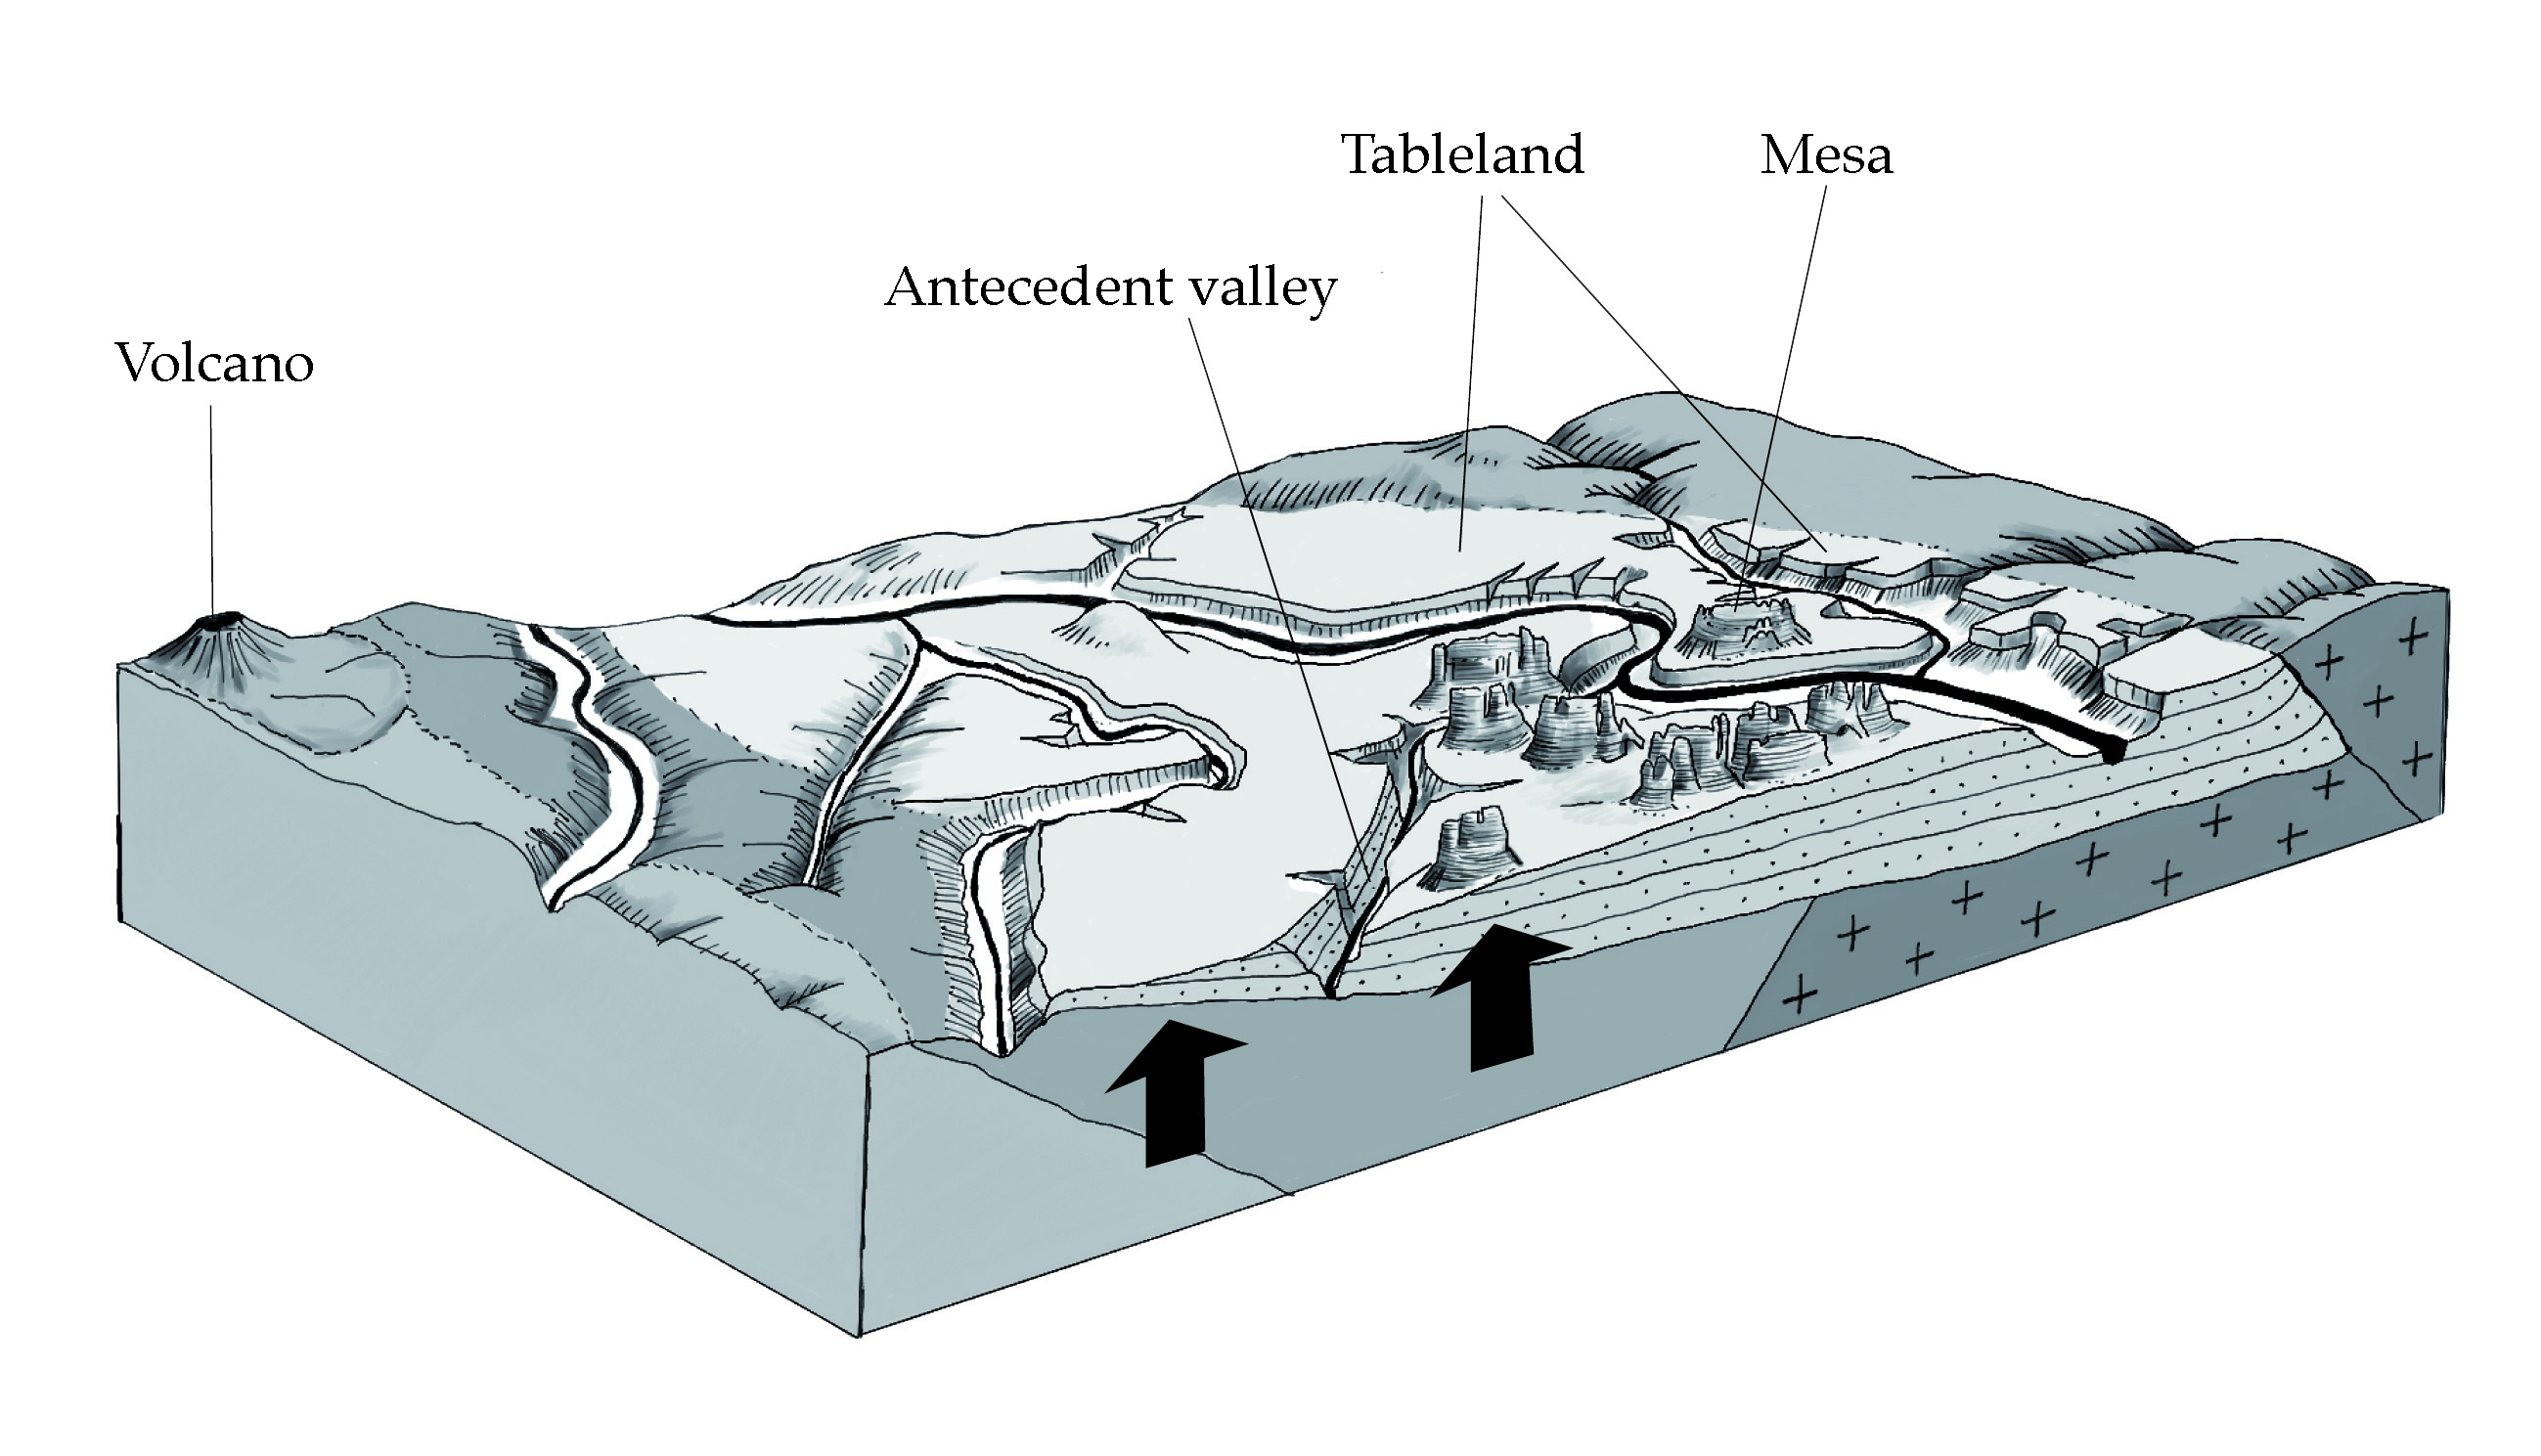 Conceptual model of the formation of tablelands